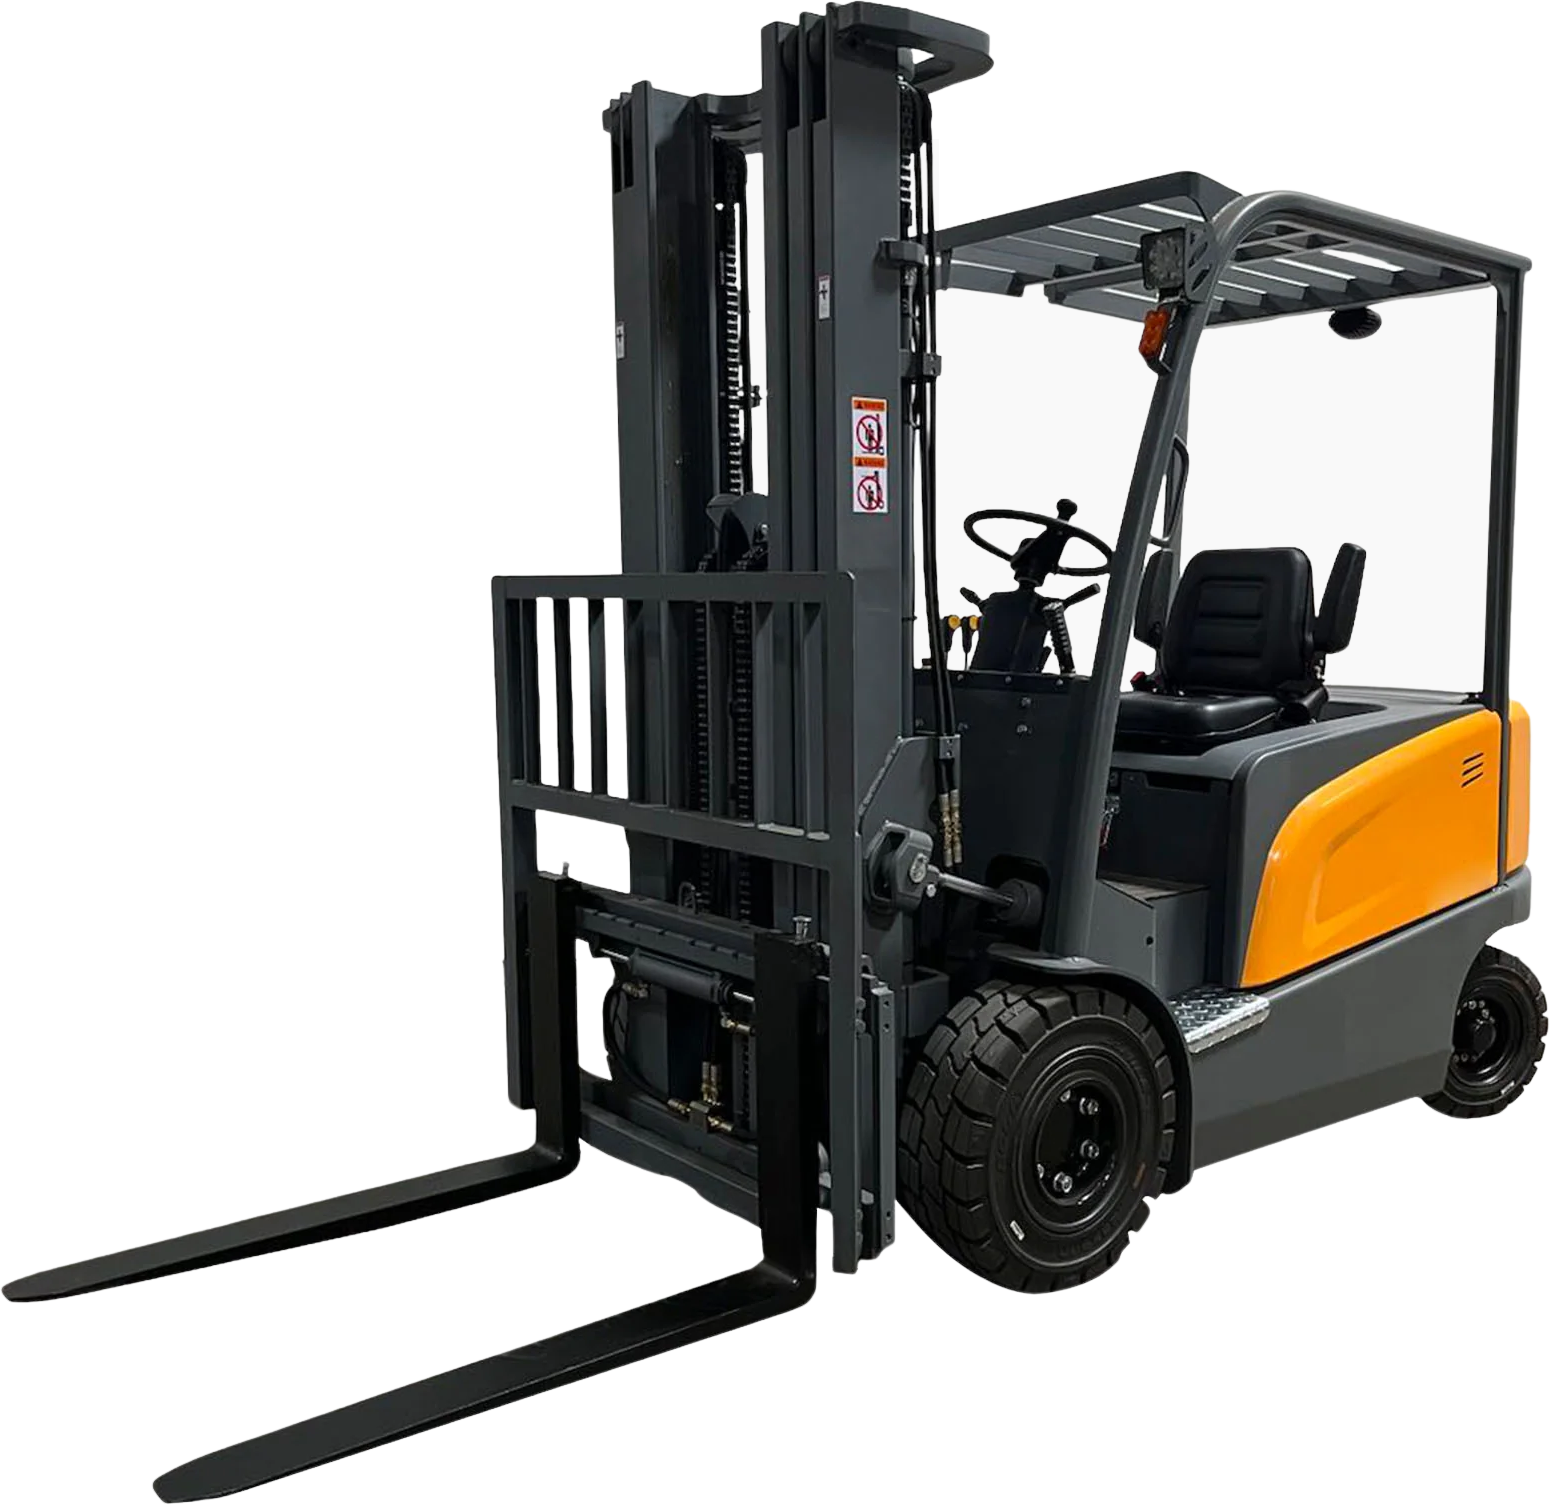 Apollolift, Apollolift A-4014 Electric Forklift Lead Acid Battery Powered 4 Wheel 197" Lifting 6600 lbs. Capacity New